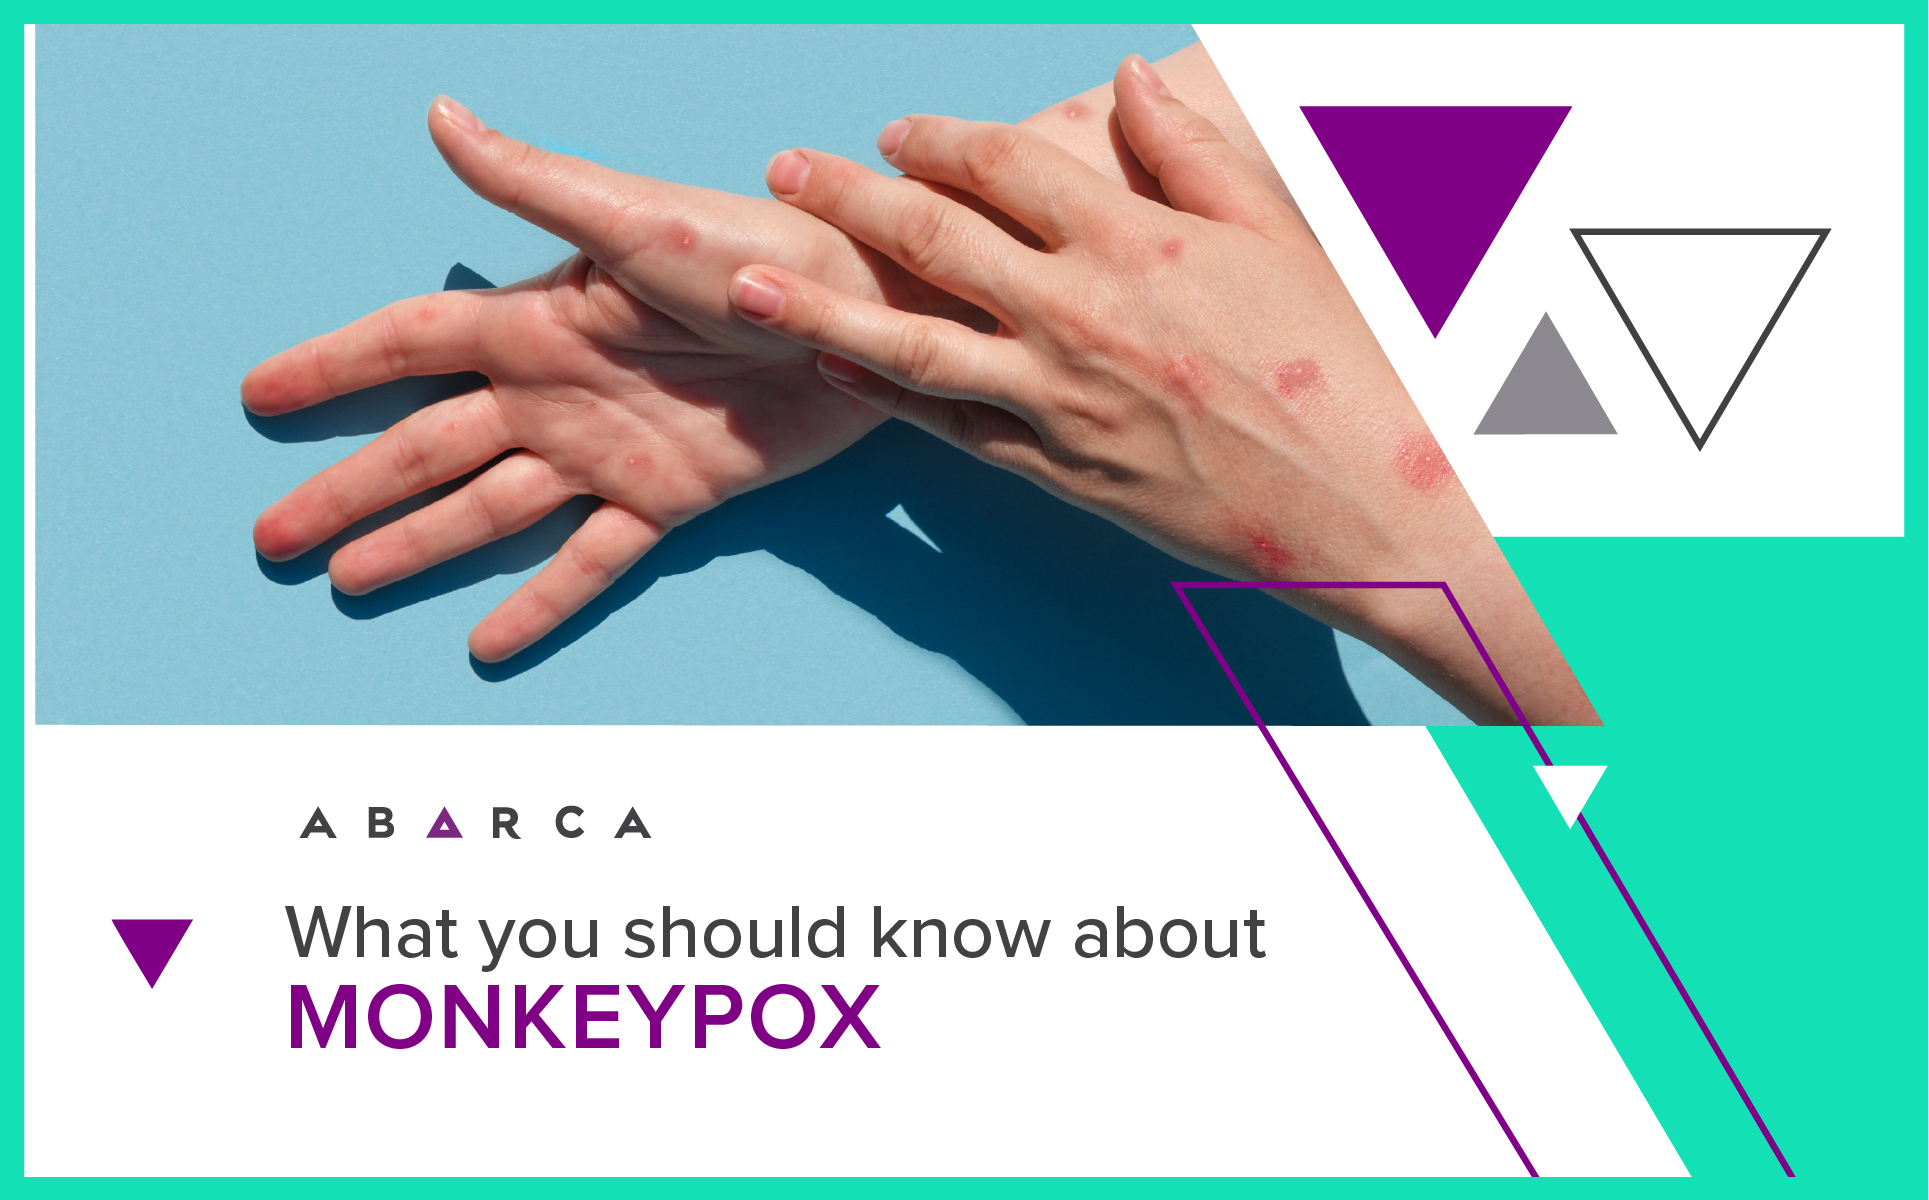 Abarca Health: What You Should Know About Monkeypox